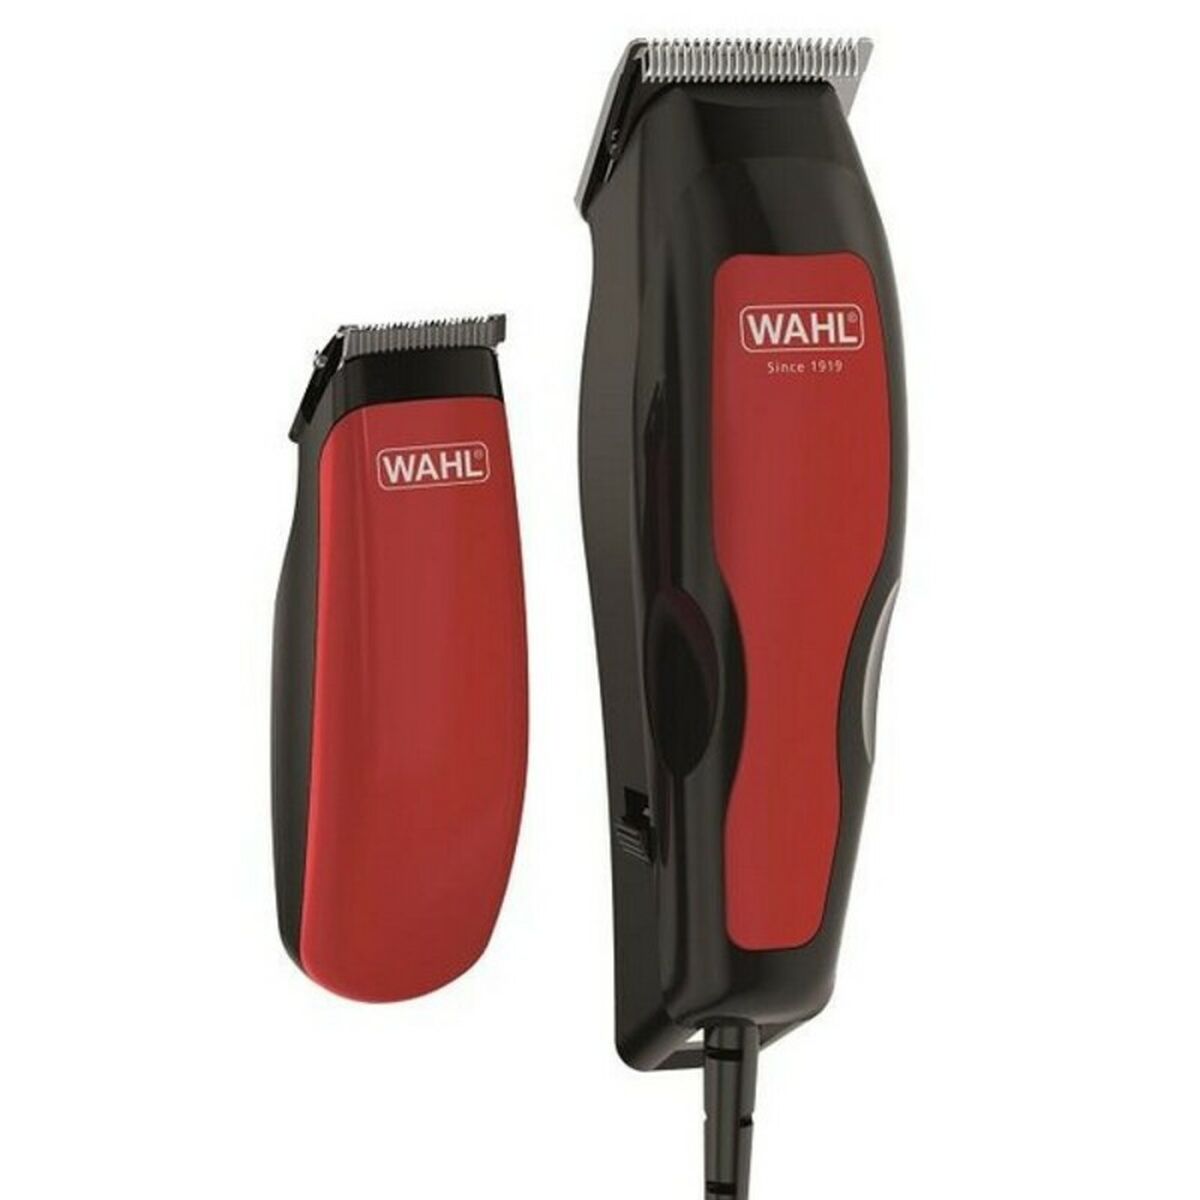 Hair clippers/Shaver Wahl 13950466